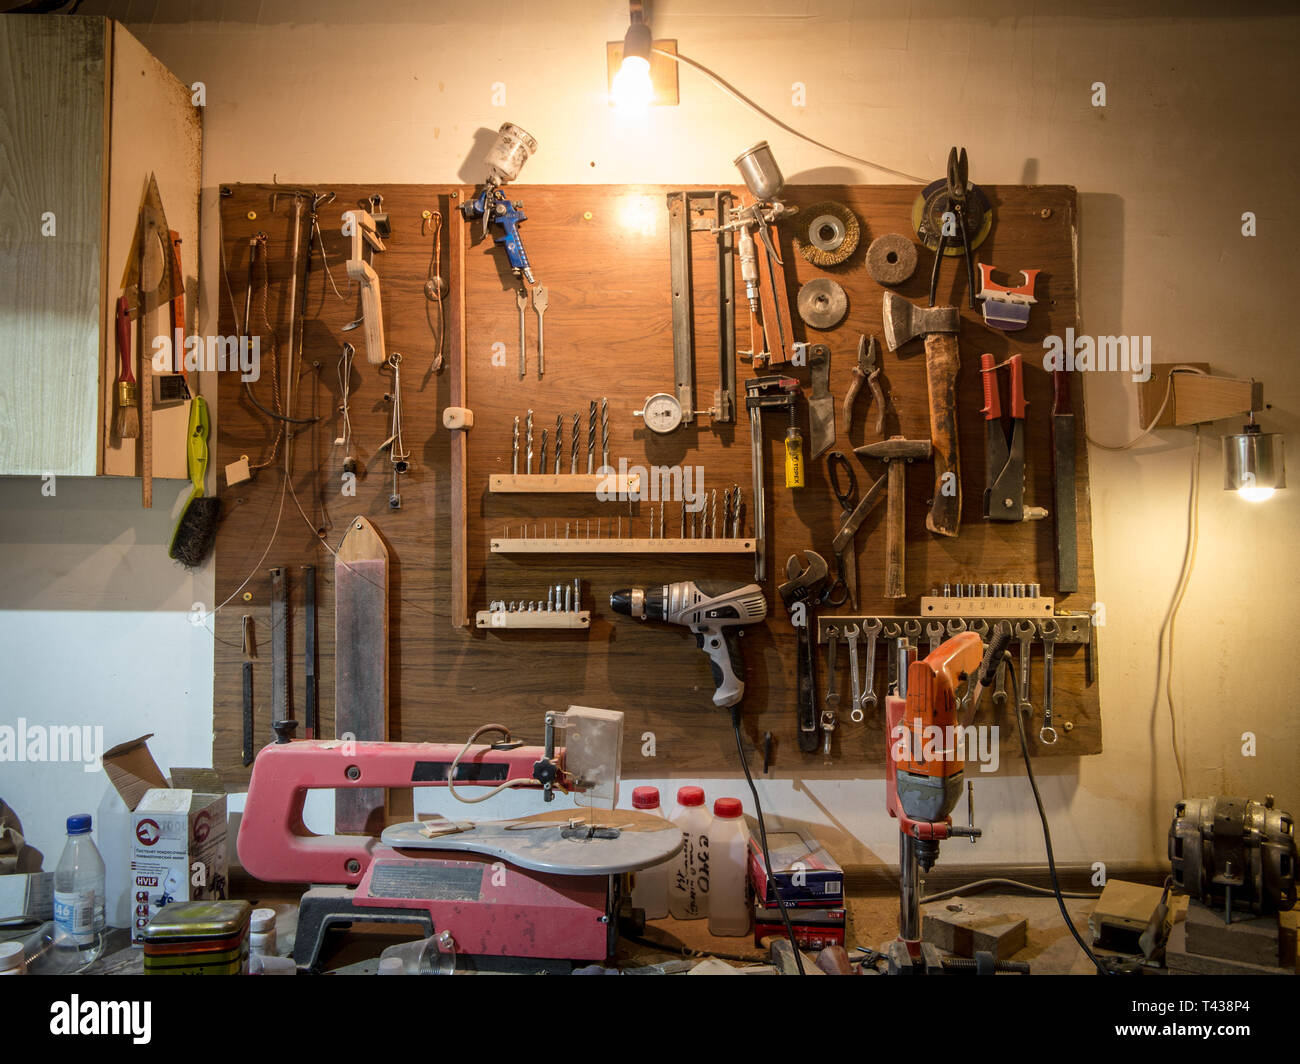 Chernihiv, Ukraine - 07/26/2016: Carpentry workshop at the middle of work day Stock Photo